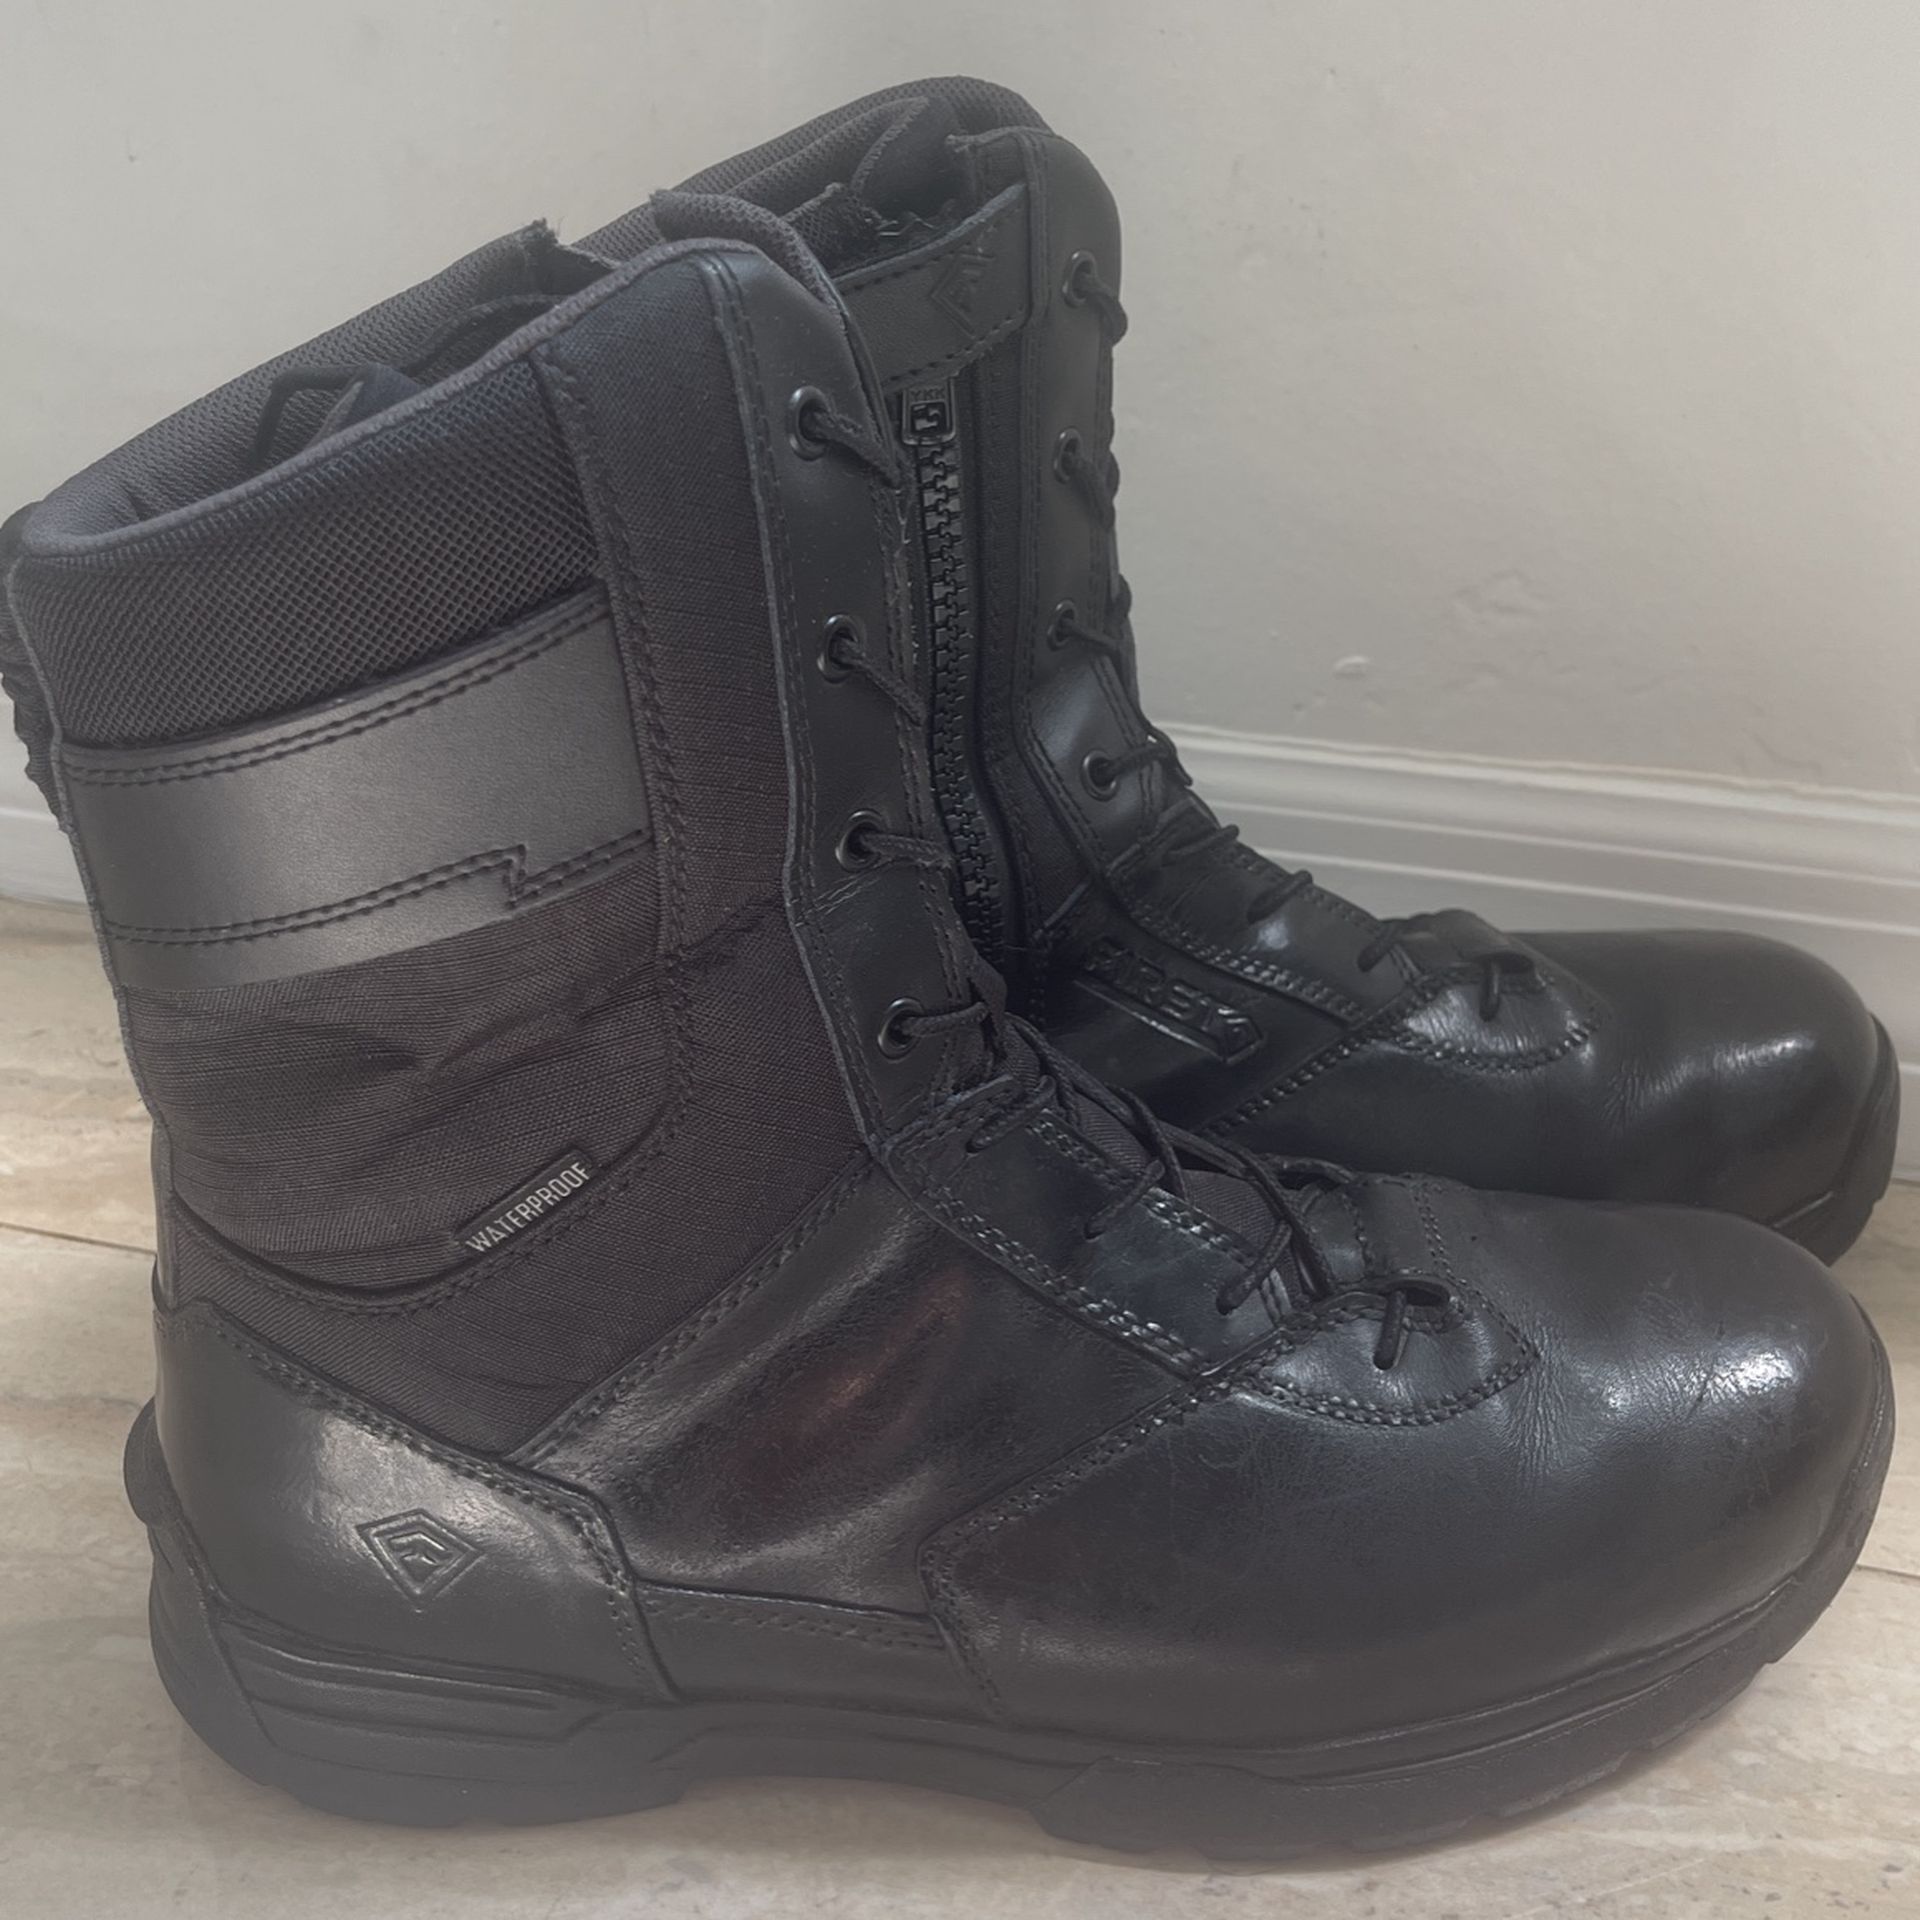 Boots (First Tactical)